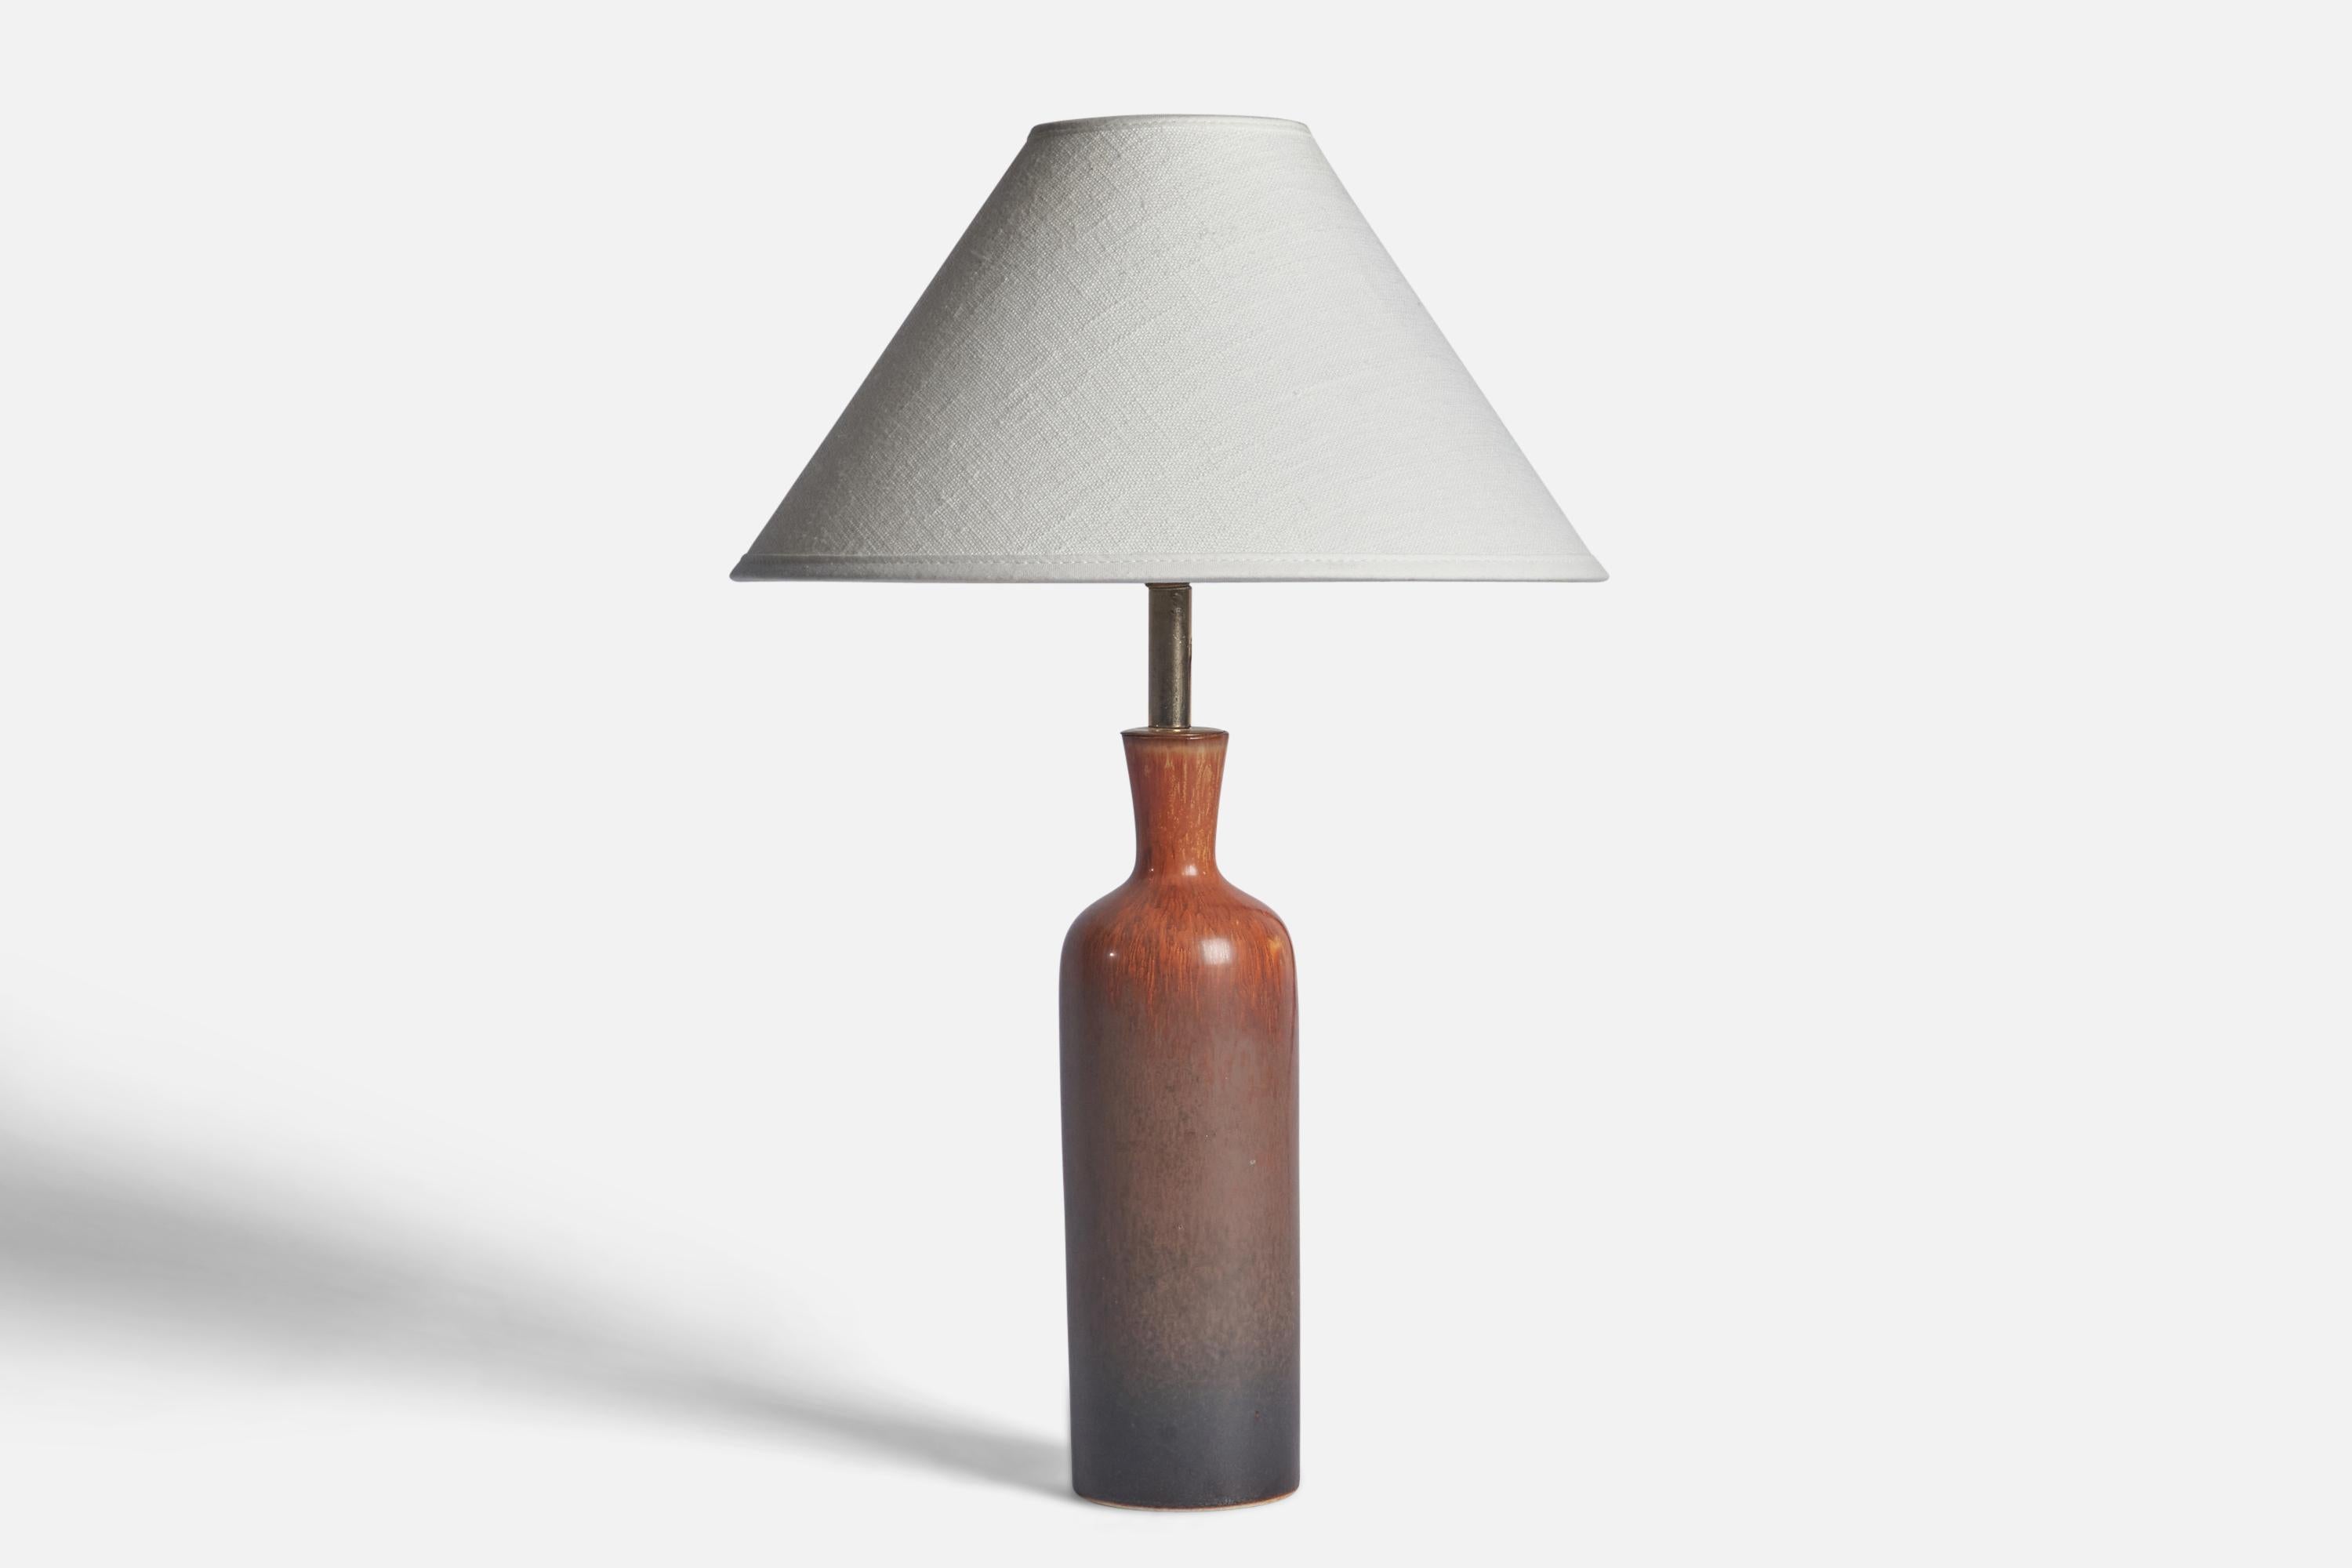 A brown and grey-glazed stoneware and brass table lamp designed by Carl-Harry Stålhane and produced by Rörstrand, Sweden, 1950s.

Dimensions of Lamp (inches): 12” H x 2.5” Diameter
Dimensions of Shade (inches): 2.5” Top Diameter x 10” Bottom